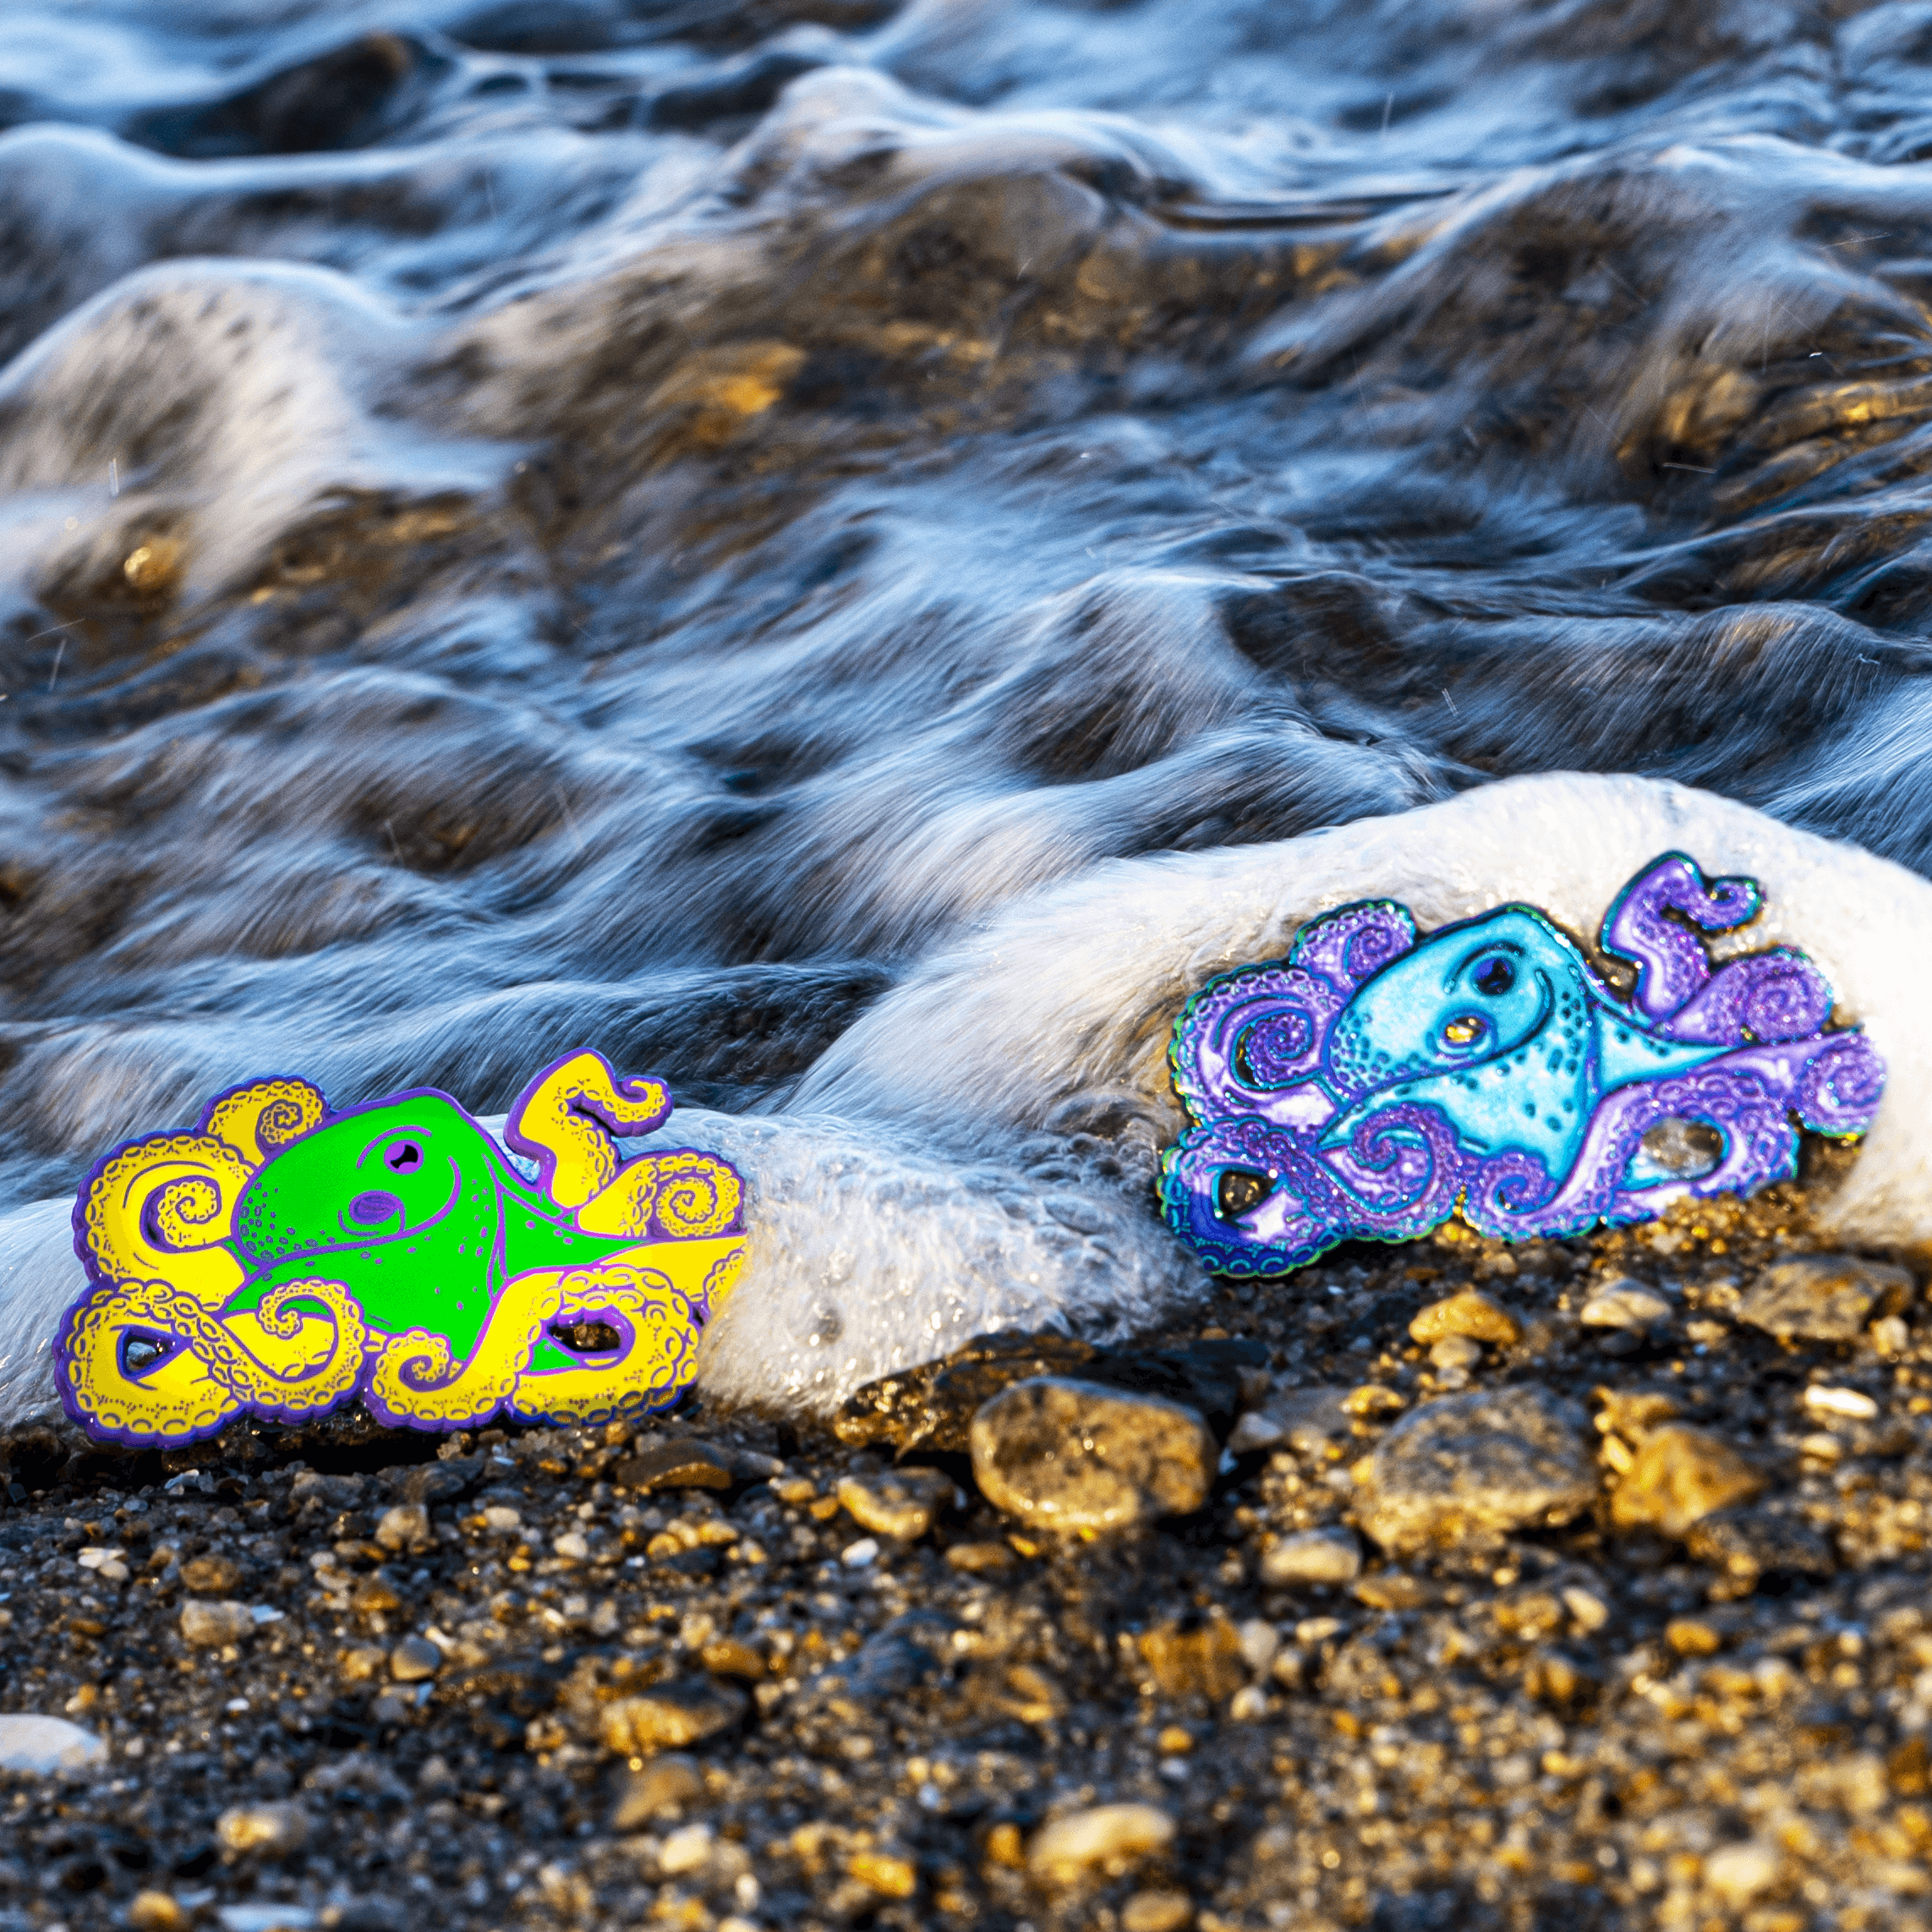 Two large octopus enamel pins sit on a pebbled beach, where they are splashed softly by the foamy sea.